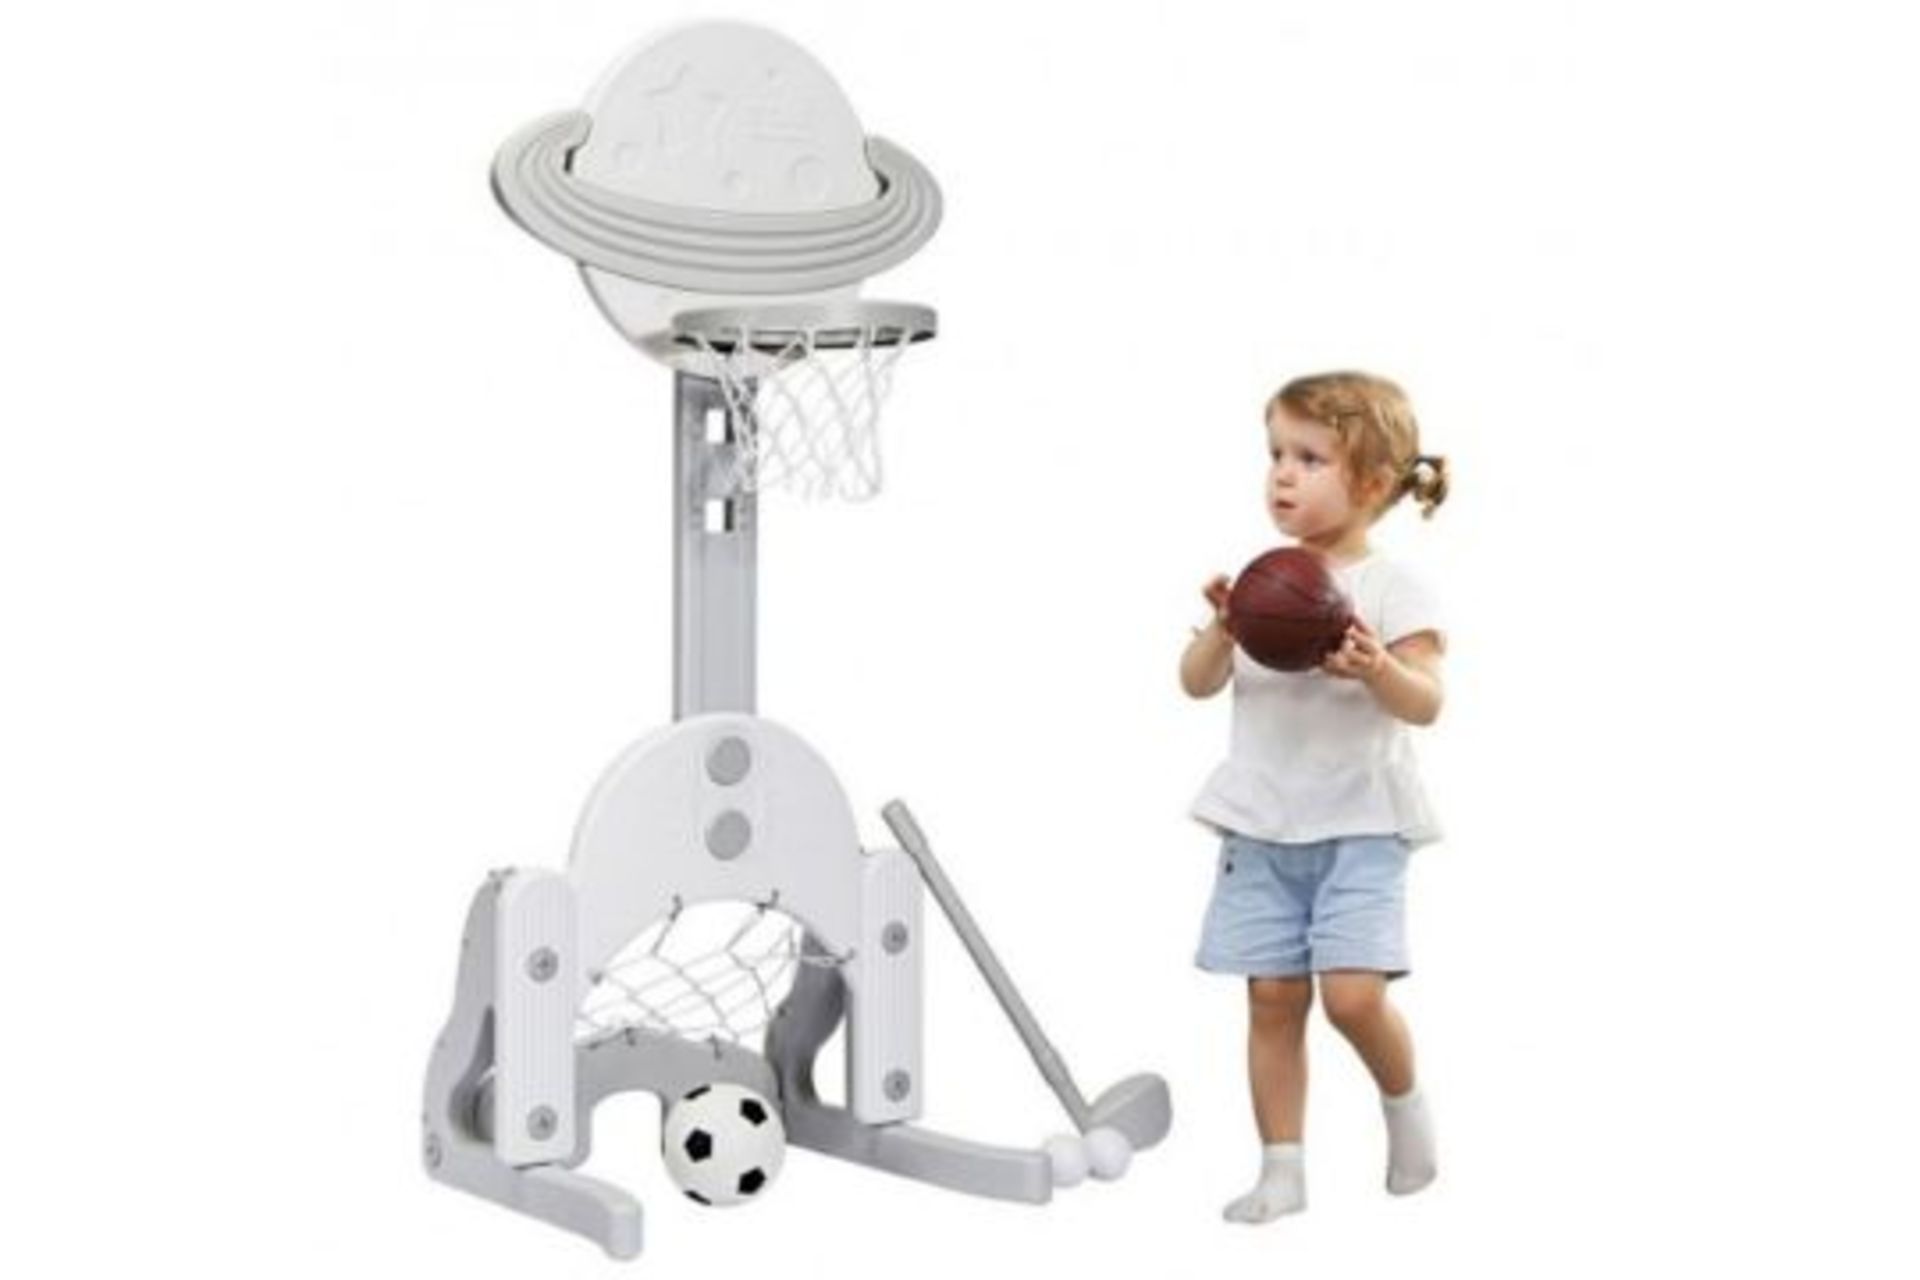 3 In 1 Kids Basketball Hoop Set With Balls. - R14.2. This stylish star basketball stand is